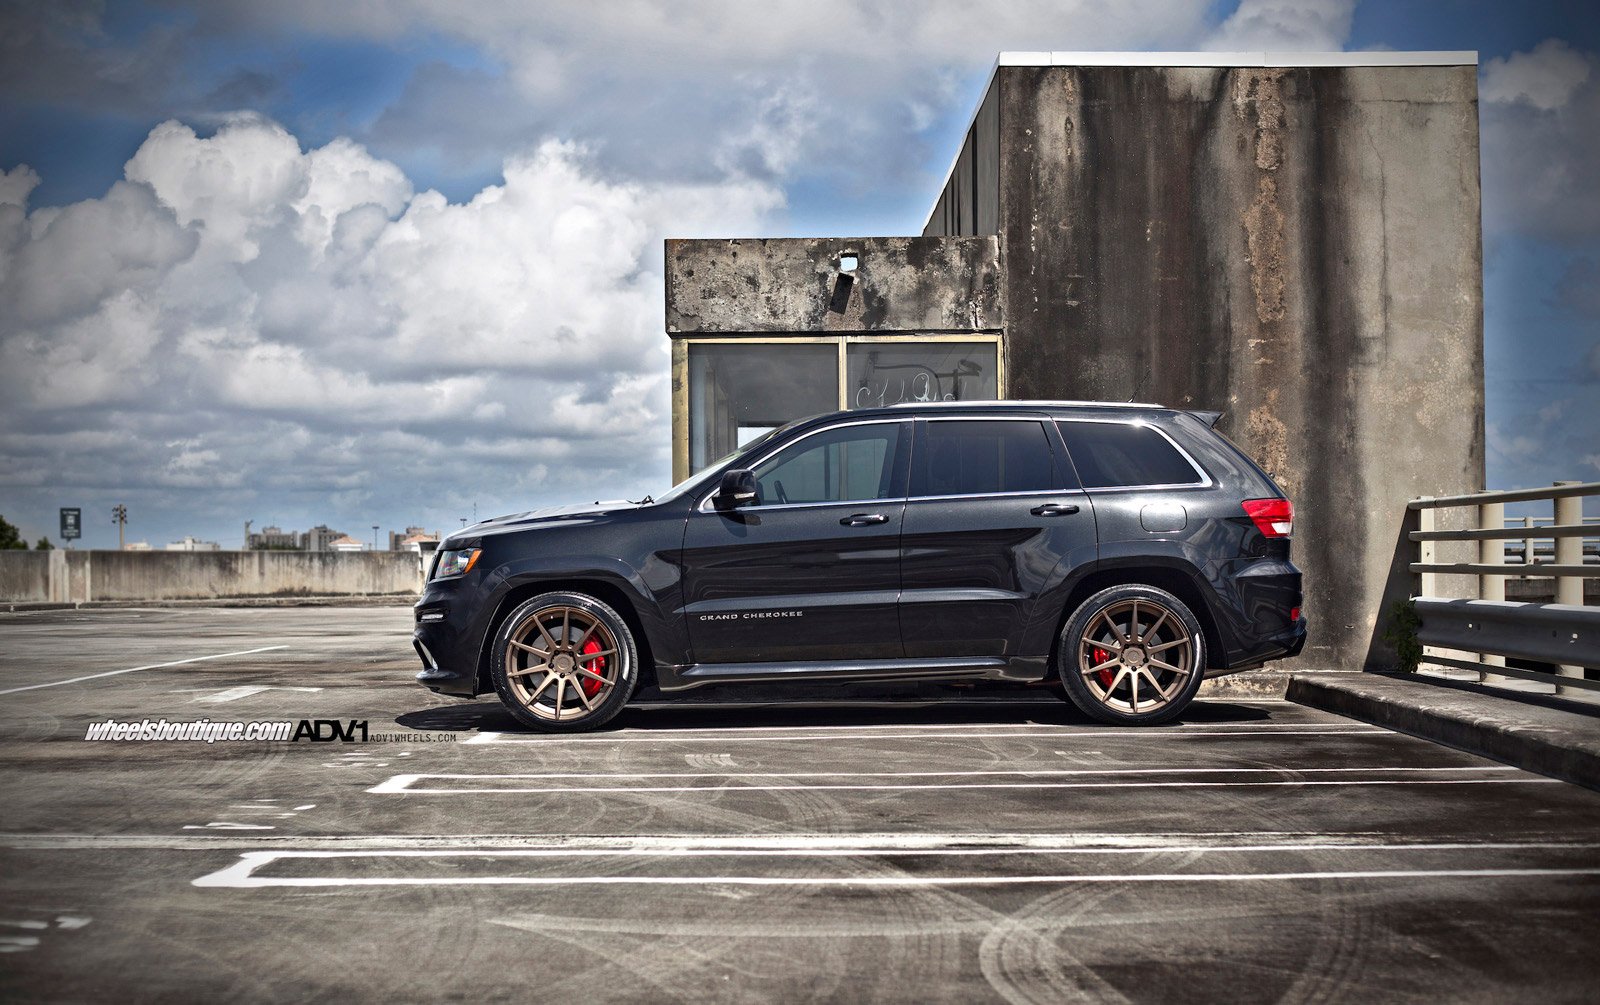 Jeep Srt Wallpapers